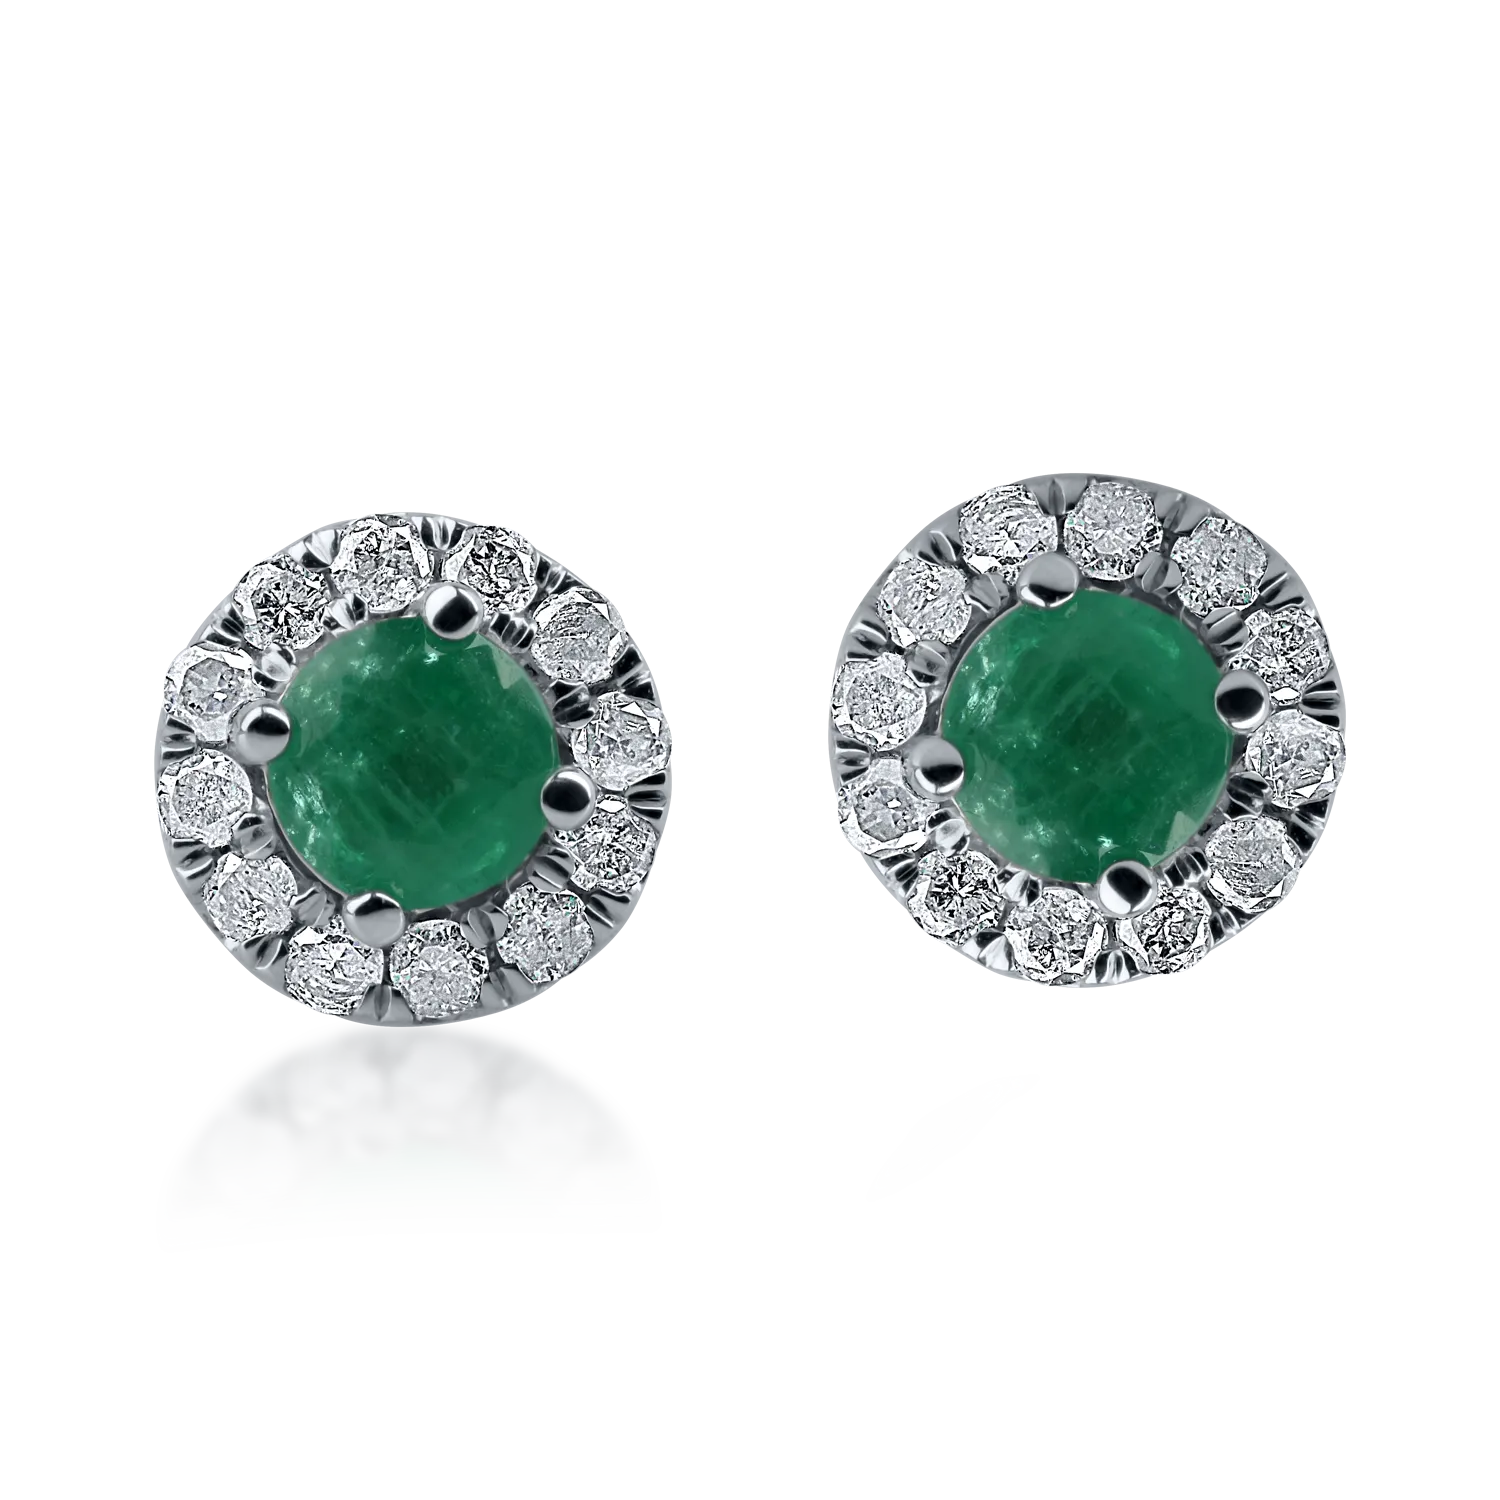 White gold earrings with 0.28ct emeralds and 0.18ct diamonds